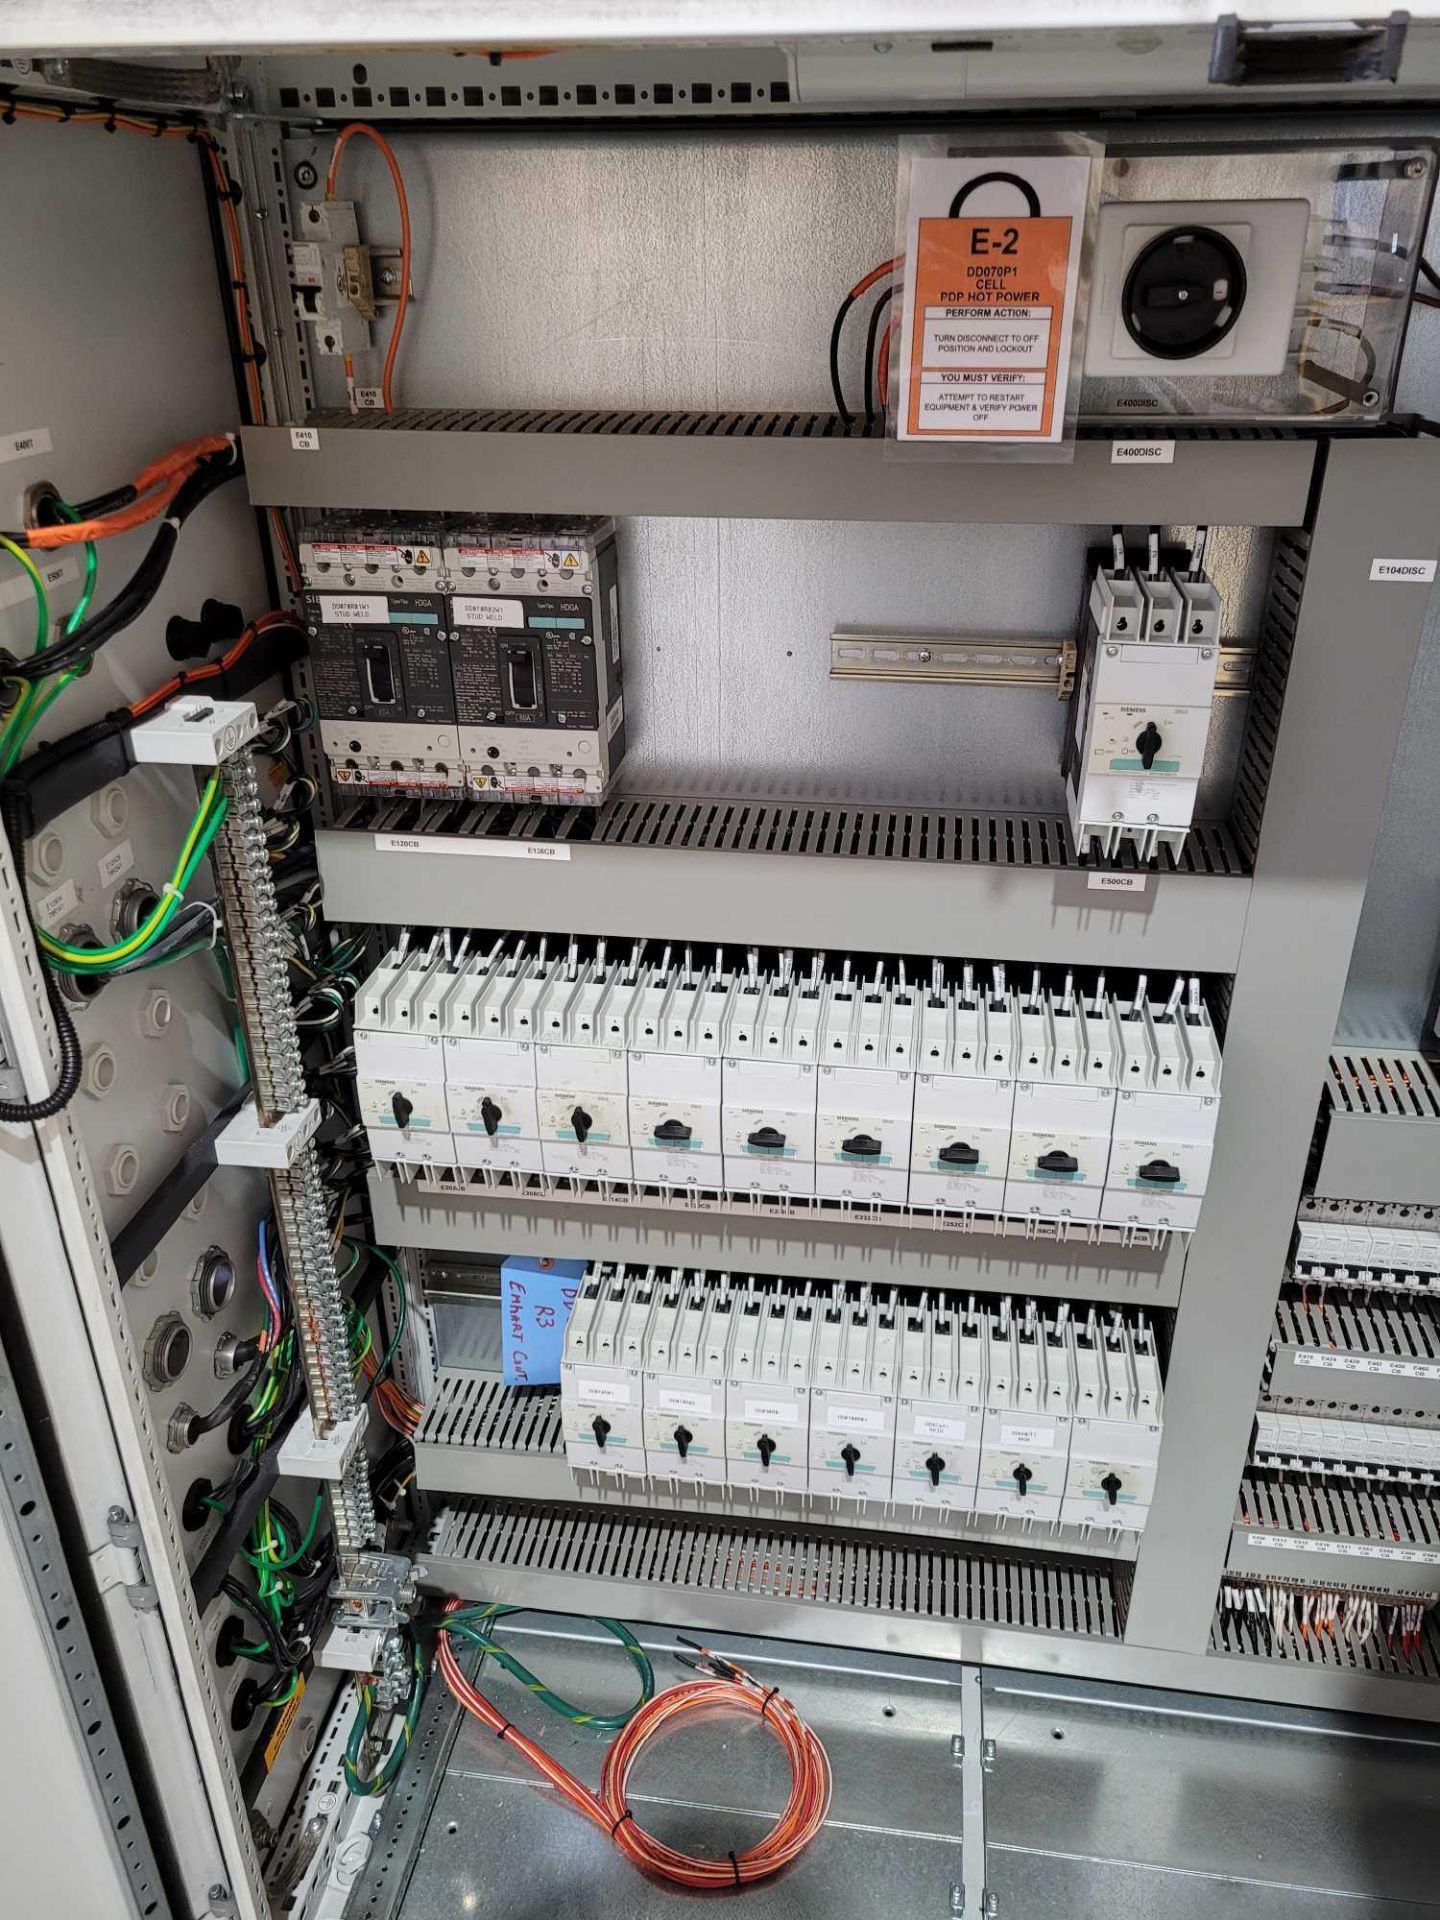 PDP ECS-4108 / 200 Amp Power Distribution Panel with (2) 60 Amp Siemens Breakers and (16) 30 Amp Sie - Image 7 of 14